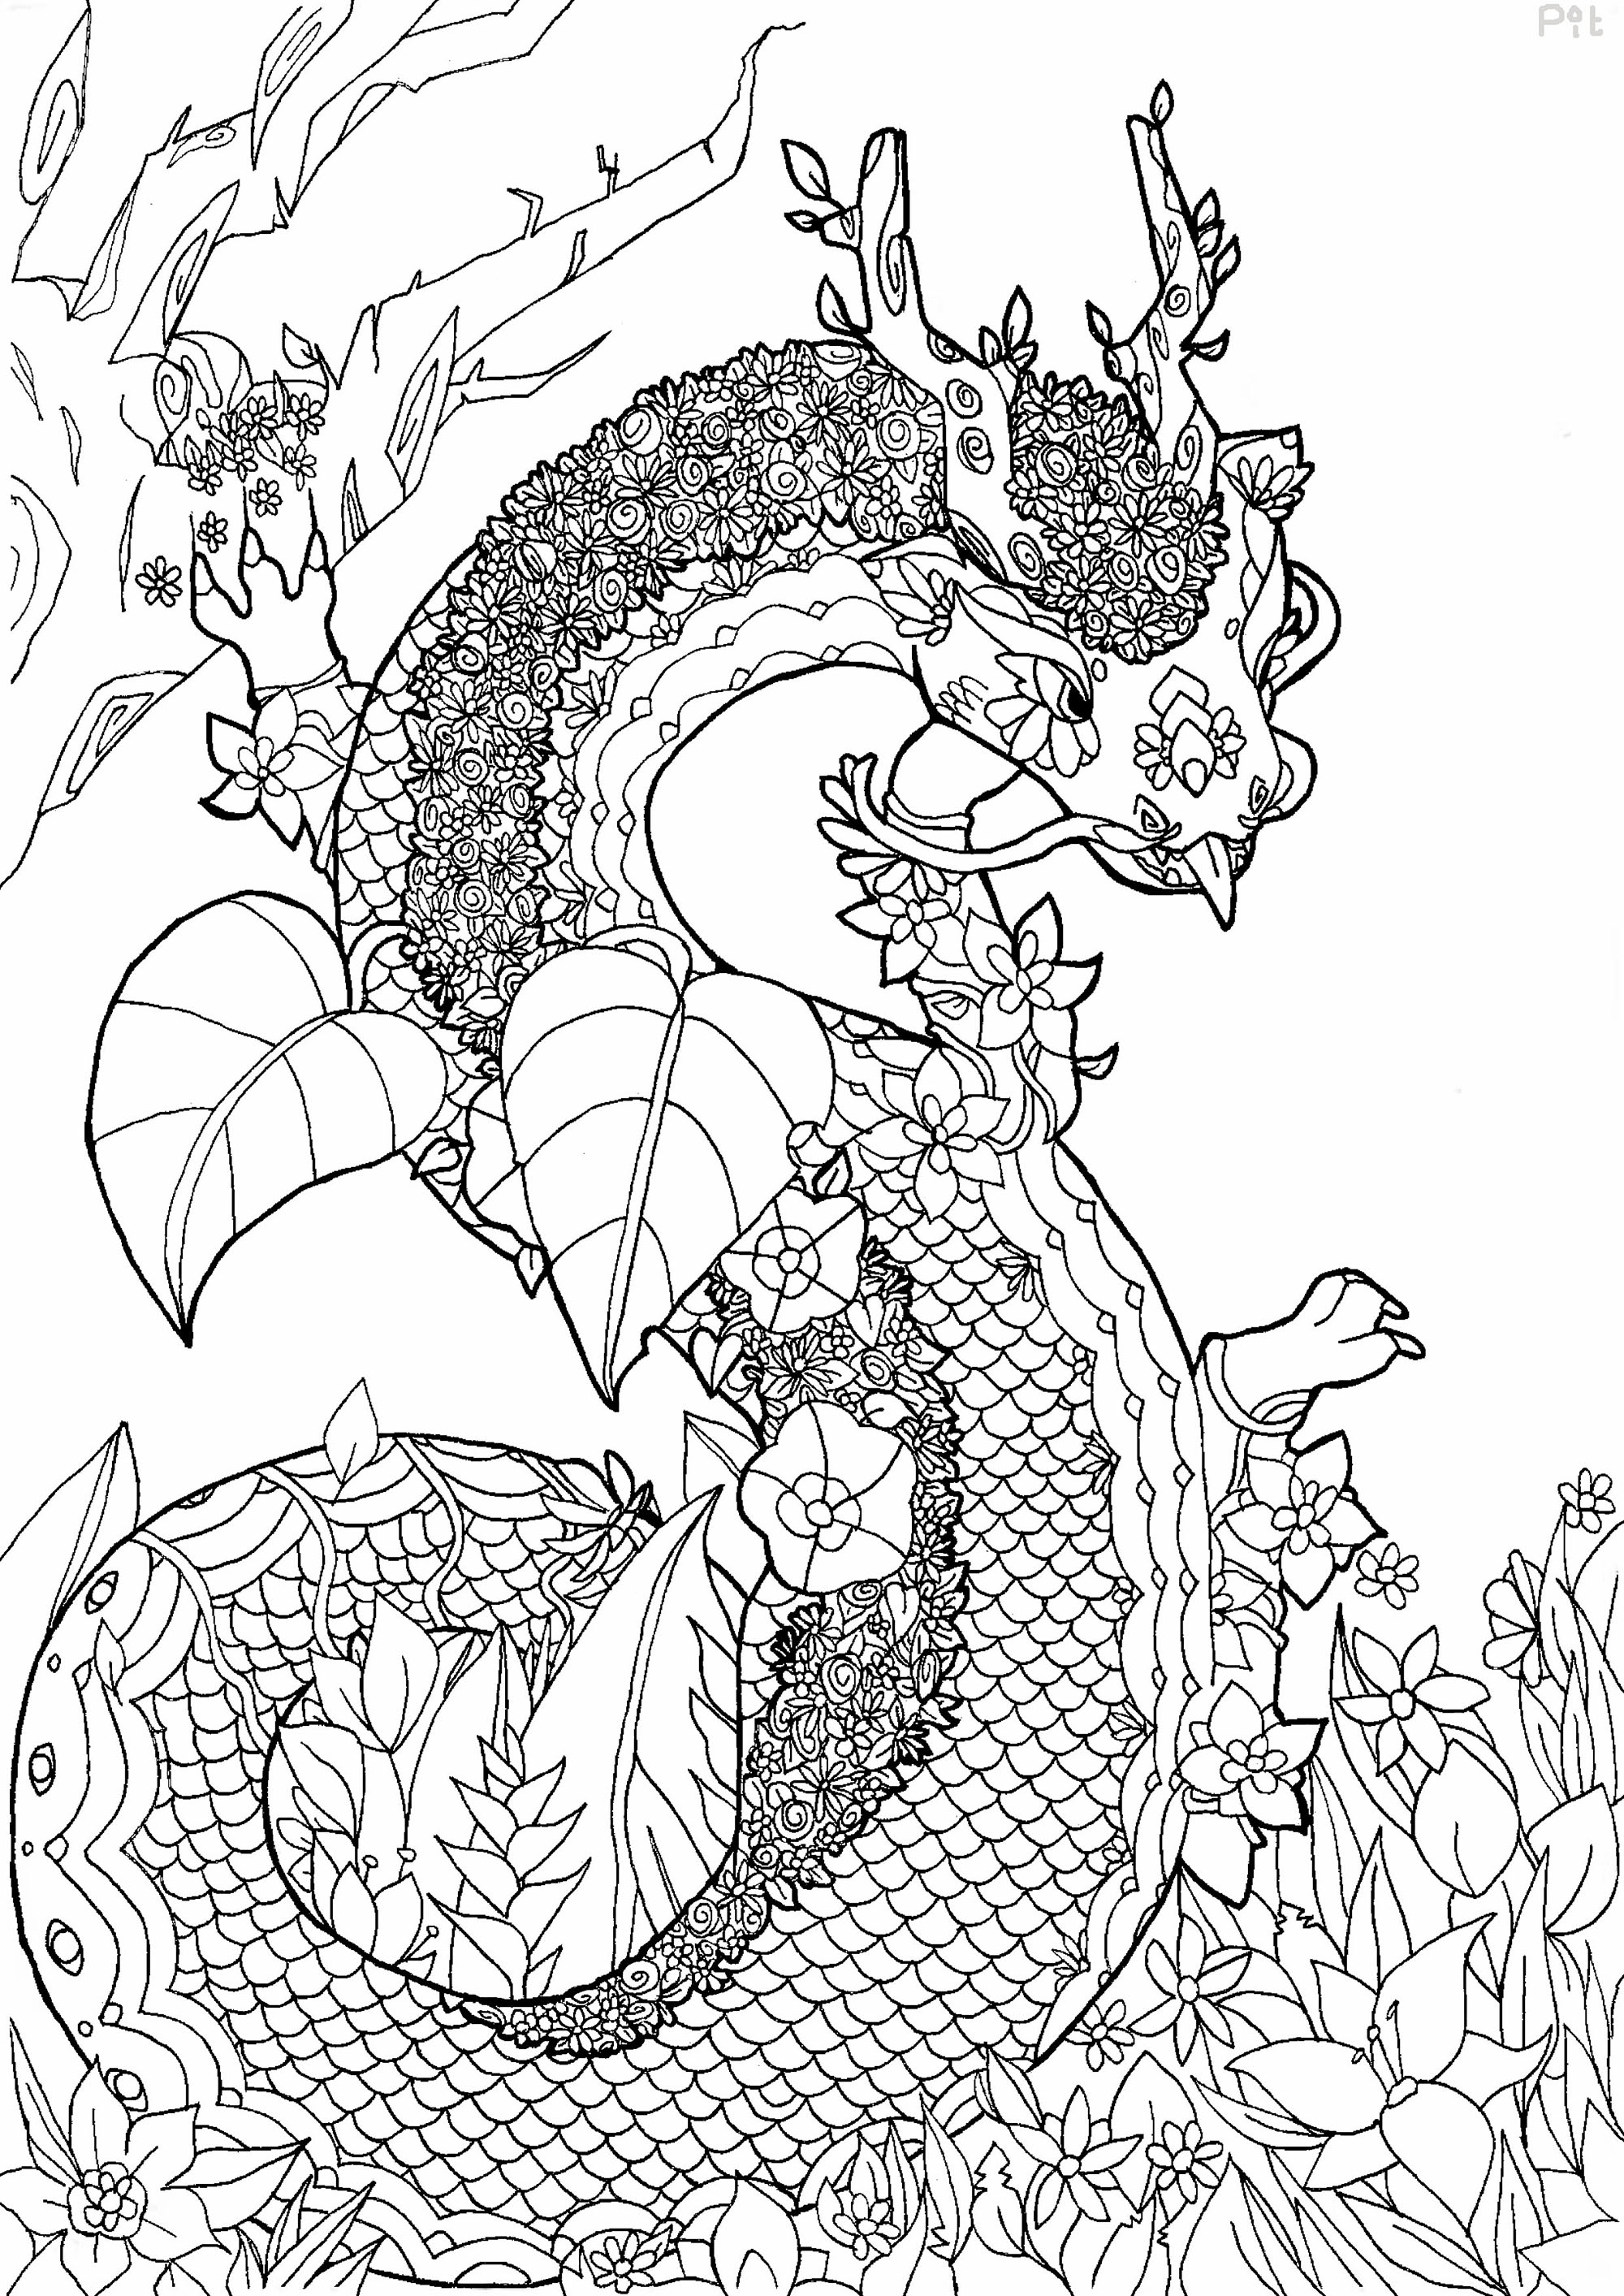 Download Dragon by pauline - Flowers Adult Coloring Pages